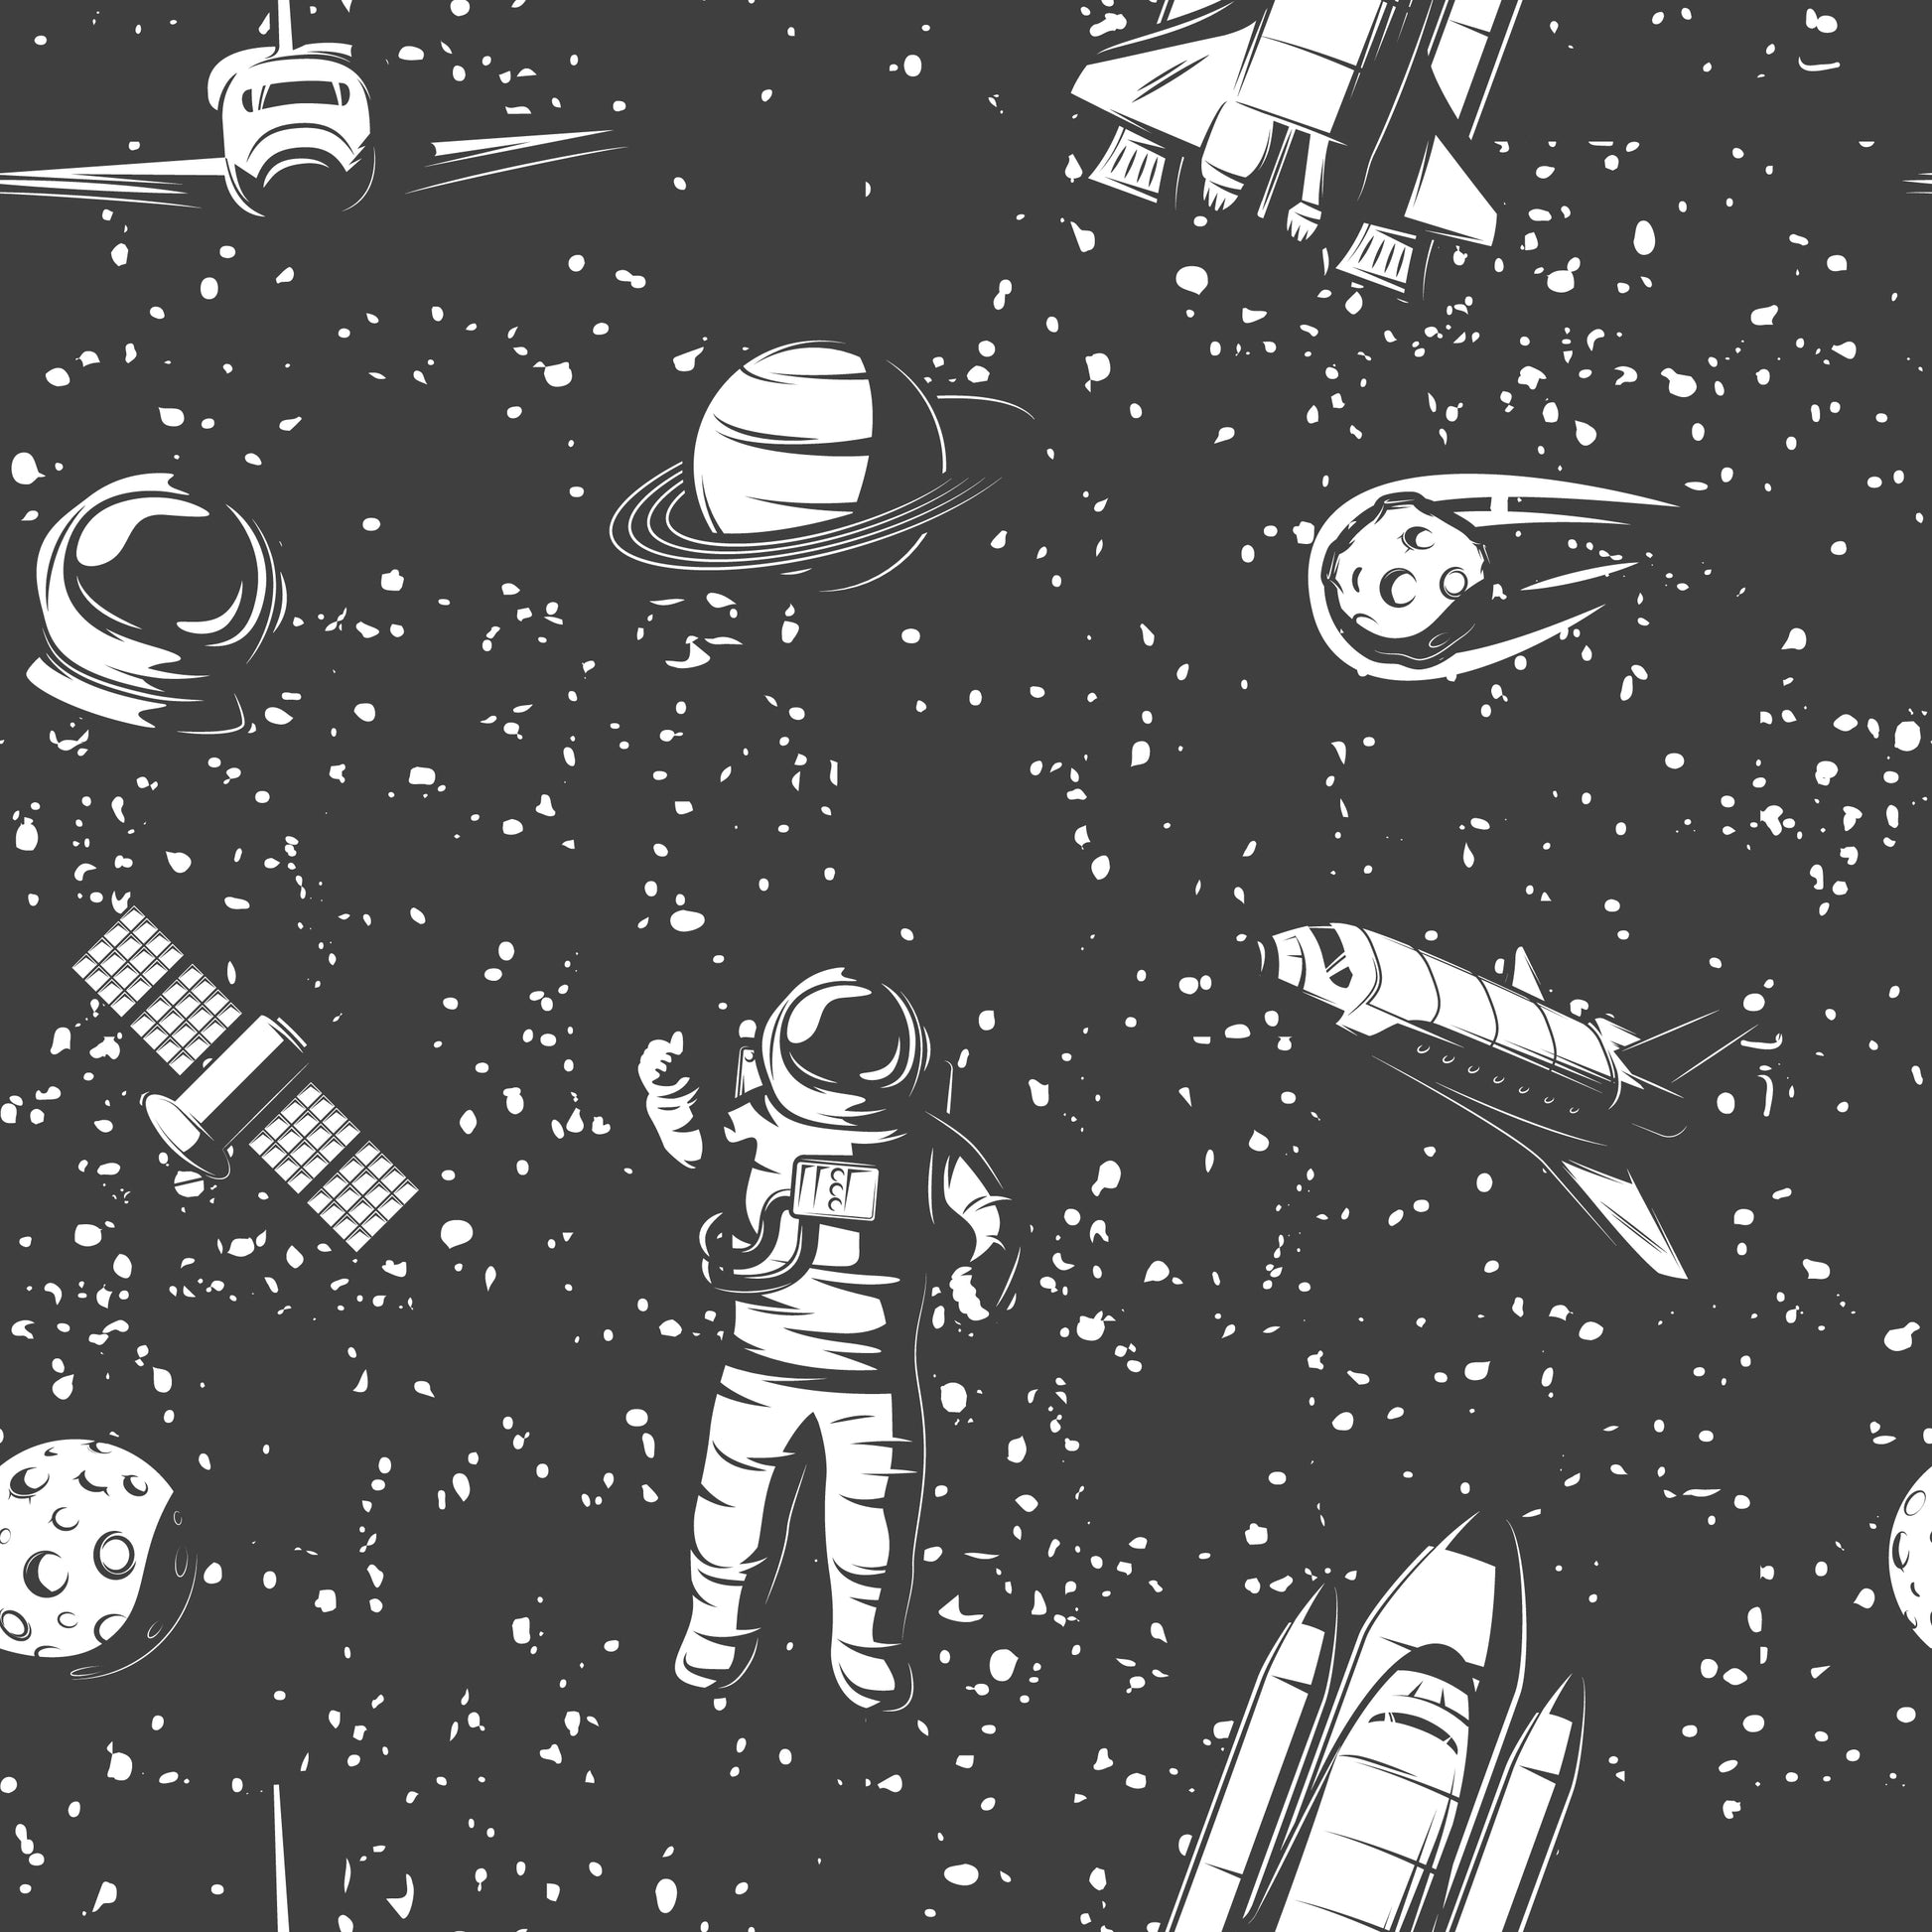 Up close Rocket to the moon wallpaper pattern featuring planets, Astronauts, space shuttles, moons, comets on a slate night sky